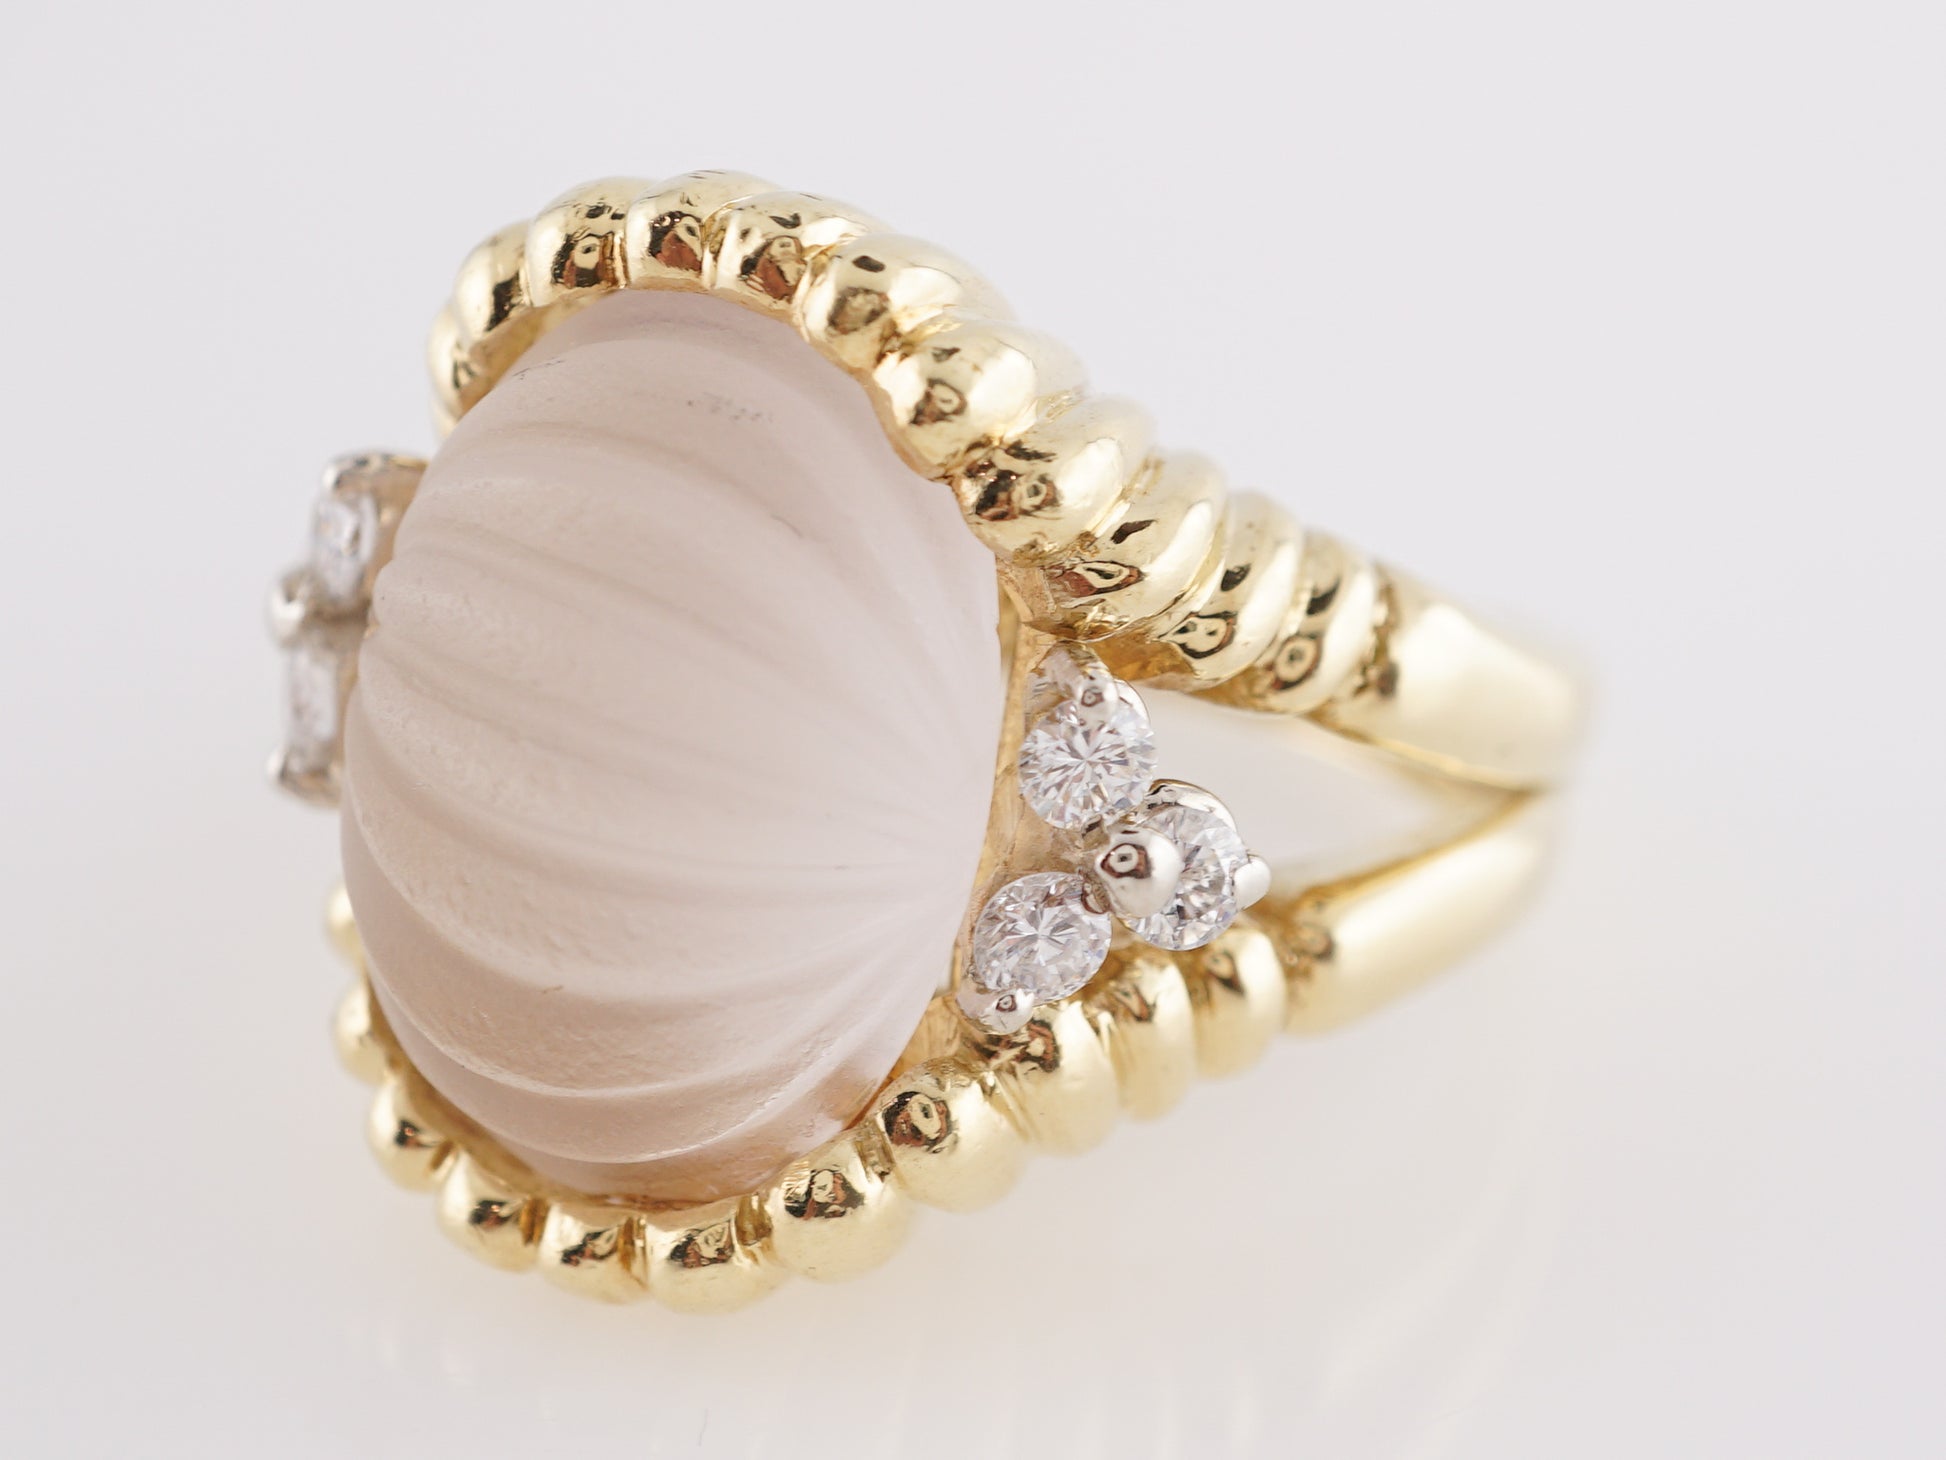 Frosted Quartz Cocktail Ring with Diamond Accents in 18k